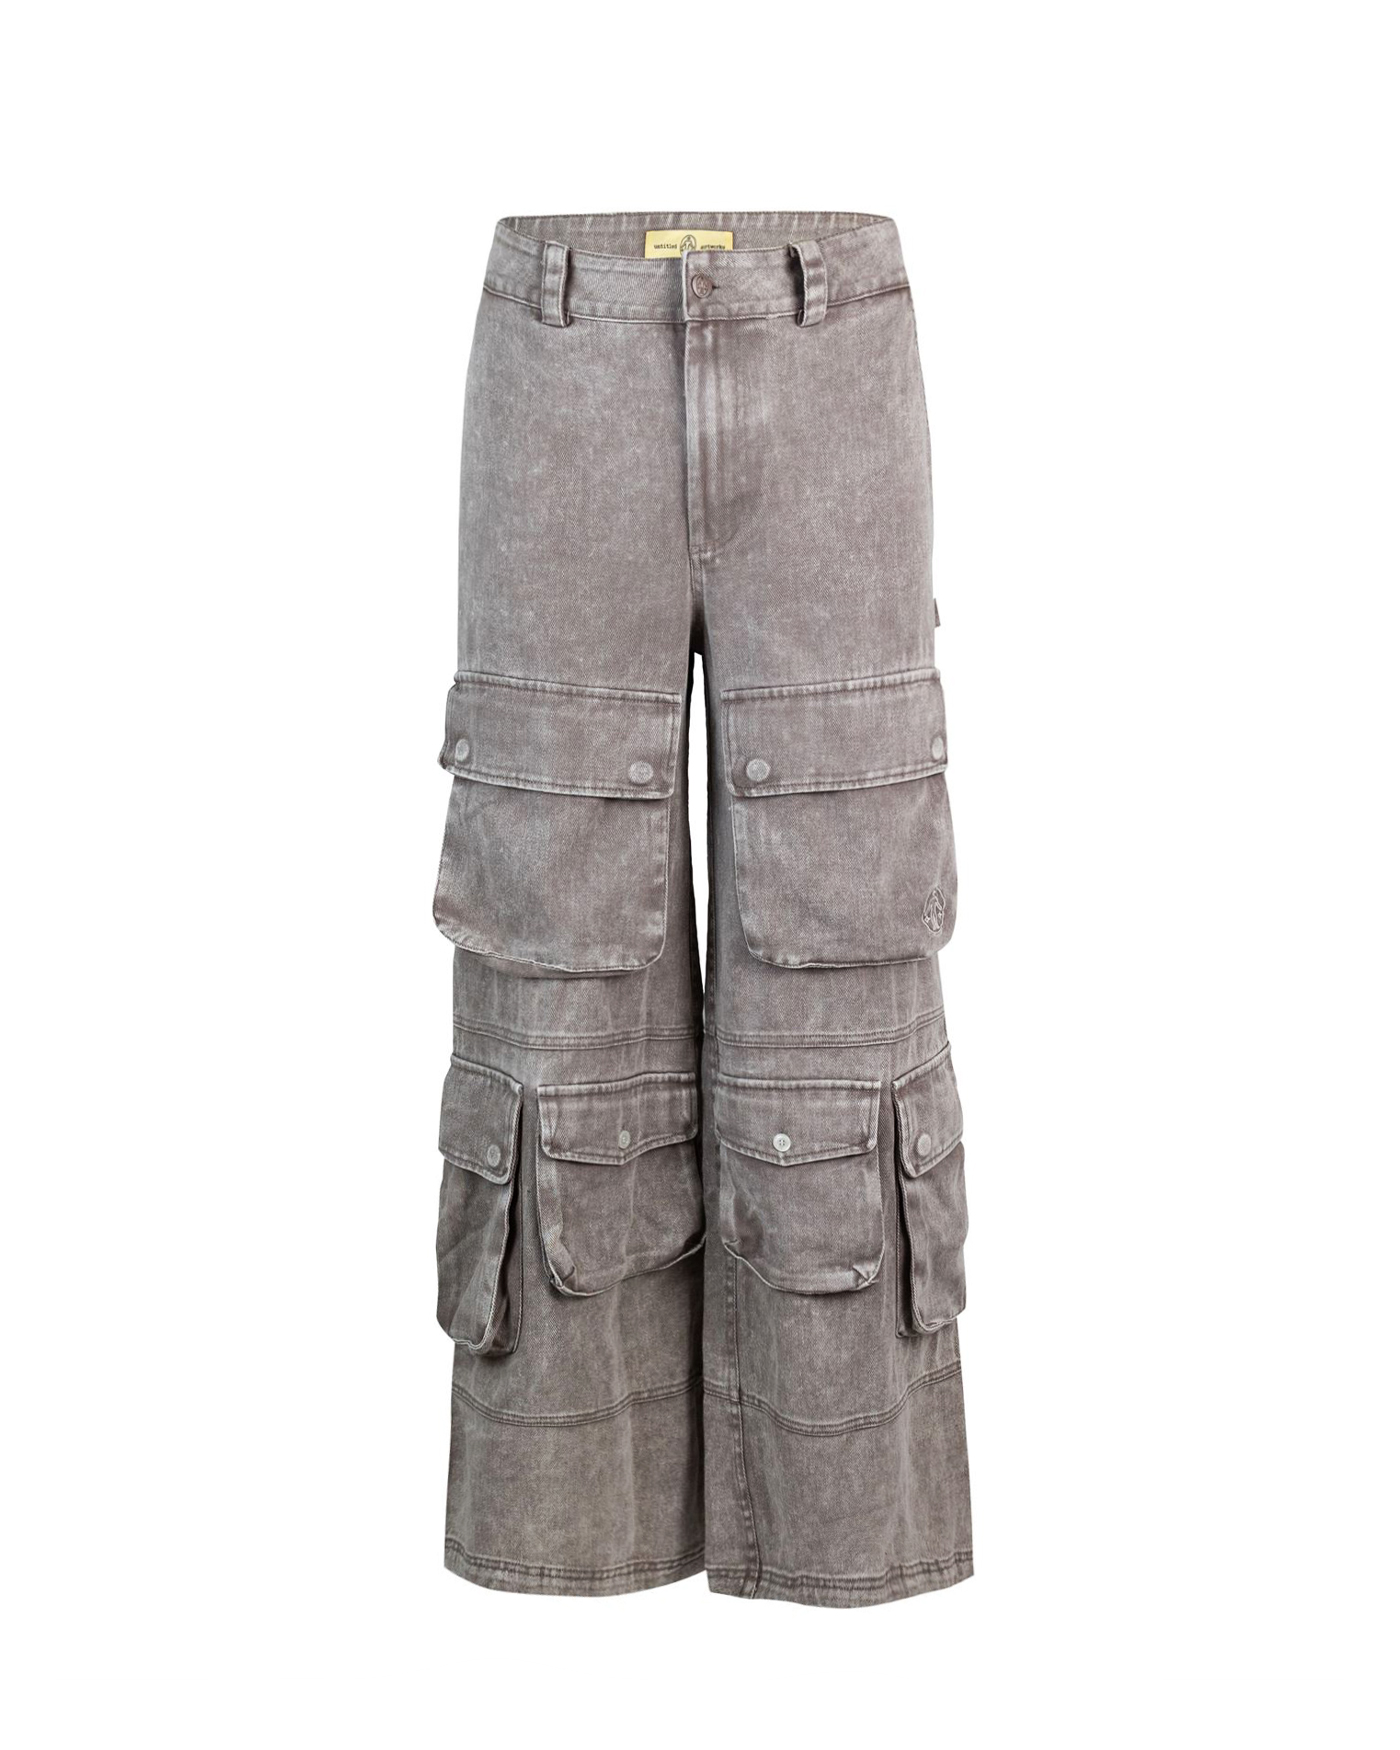 Untitled Artworks Pantalone Cargo Relaxed Fit Grigio Slavato In Taupe Grey